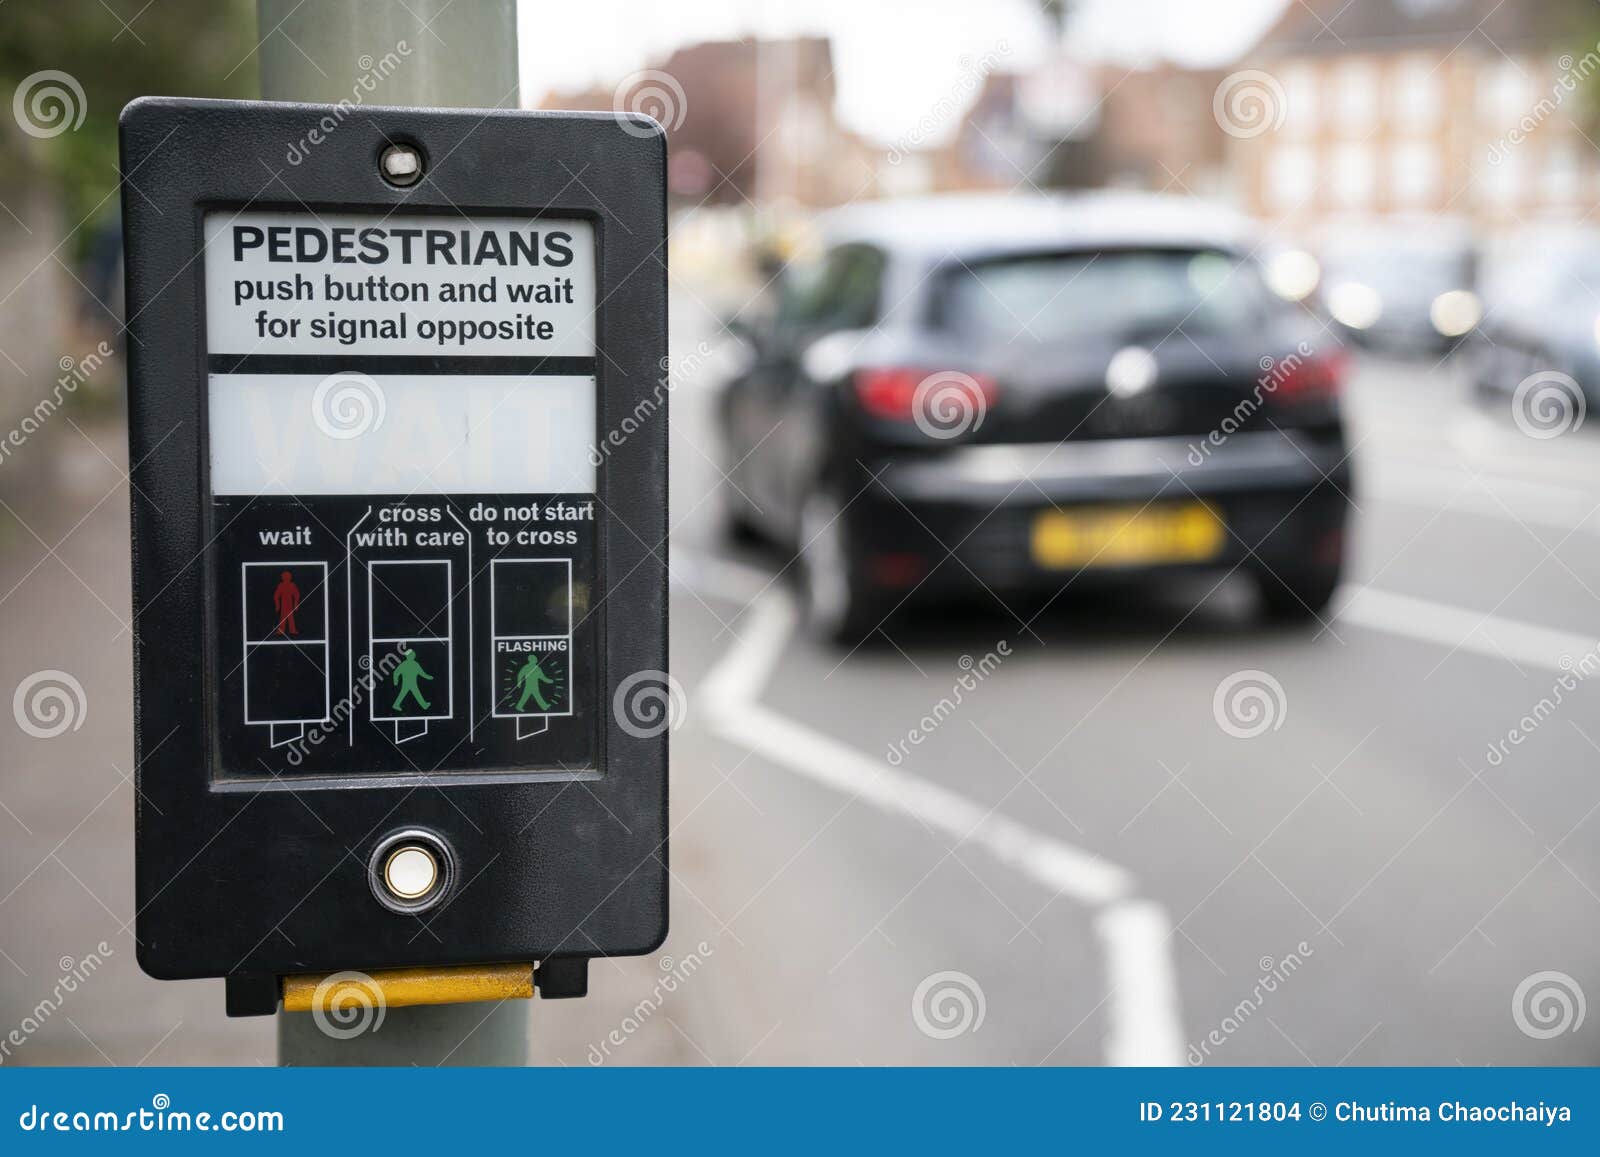 pedestrains push button and wait for signal opposite at crosswalk, traffic light at square in urban or city